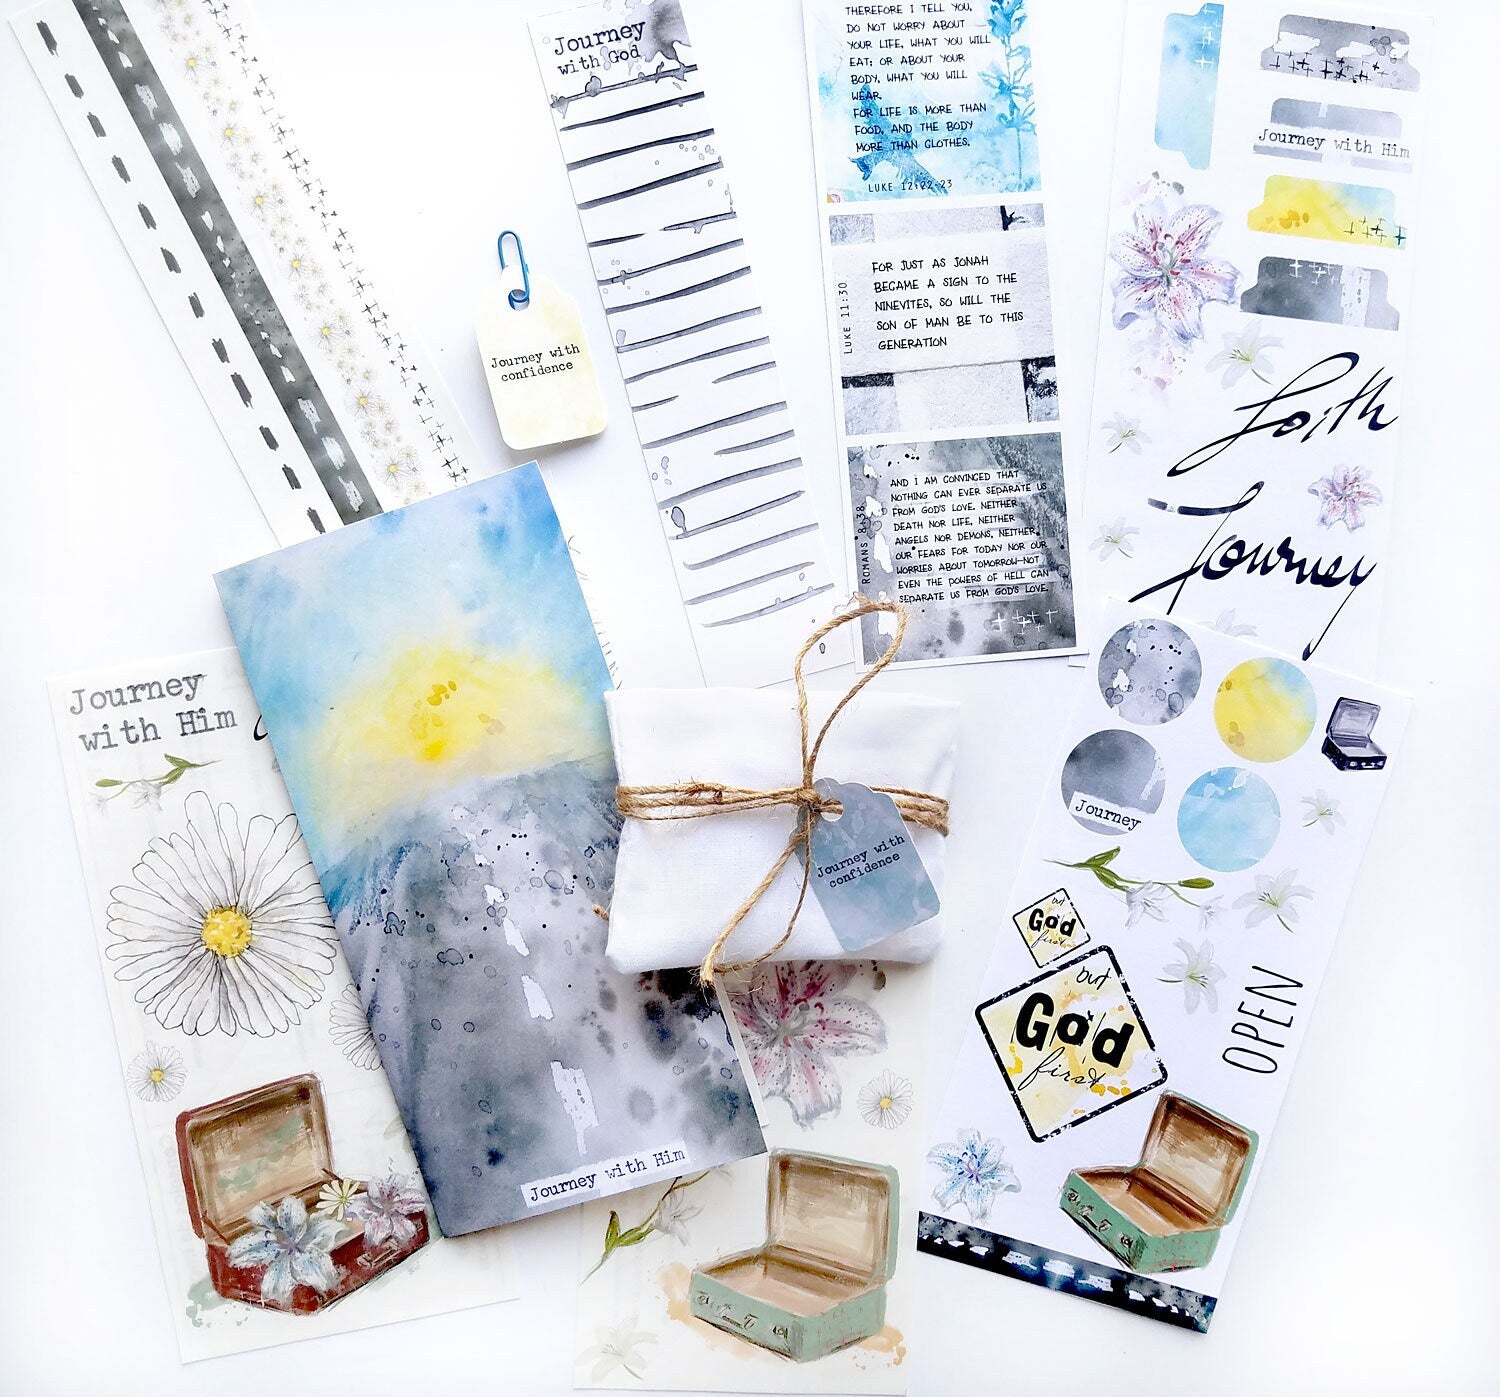 Journey with confidence - a Bible journaling creative devotional kit – Open  Journey